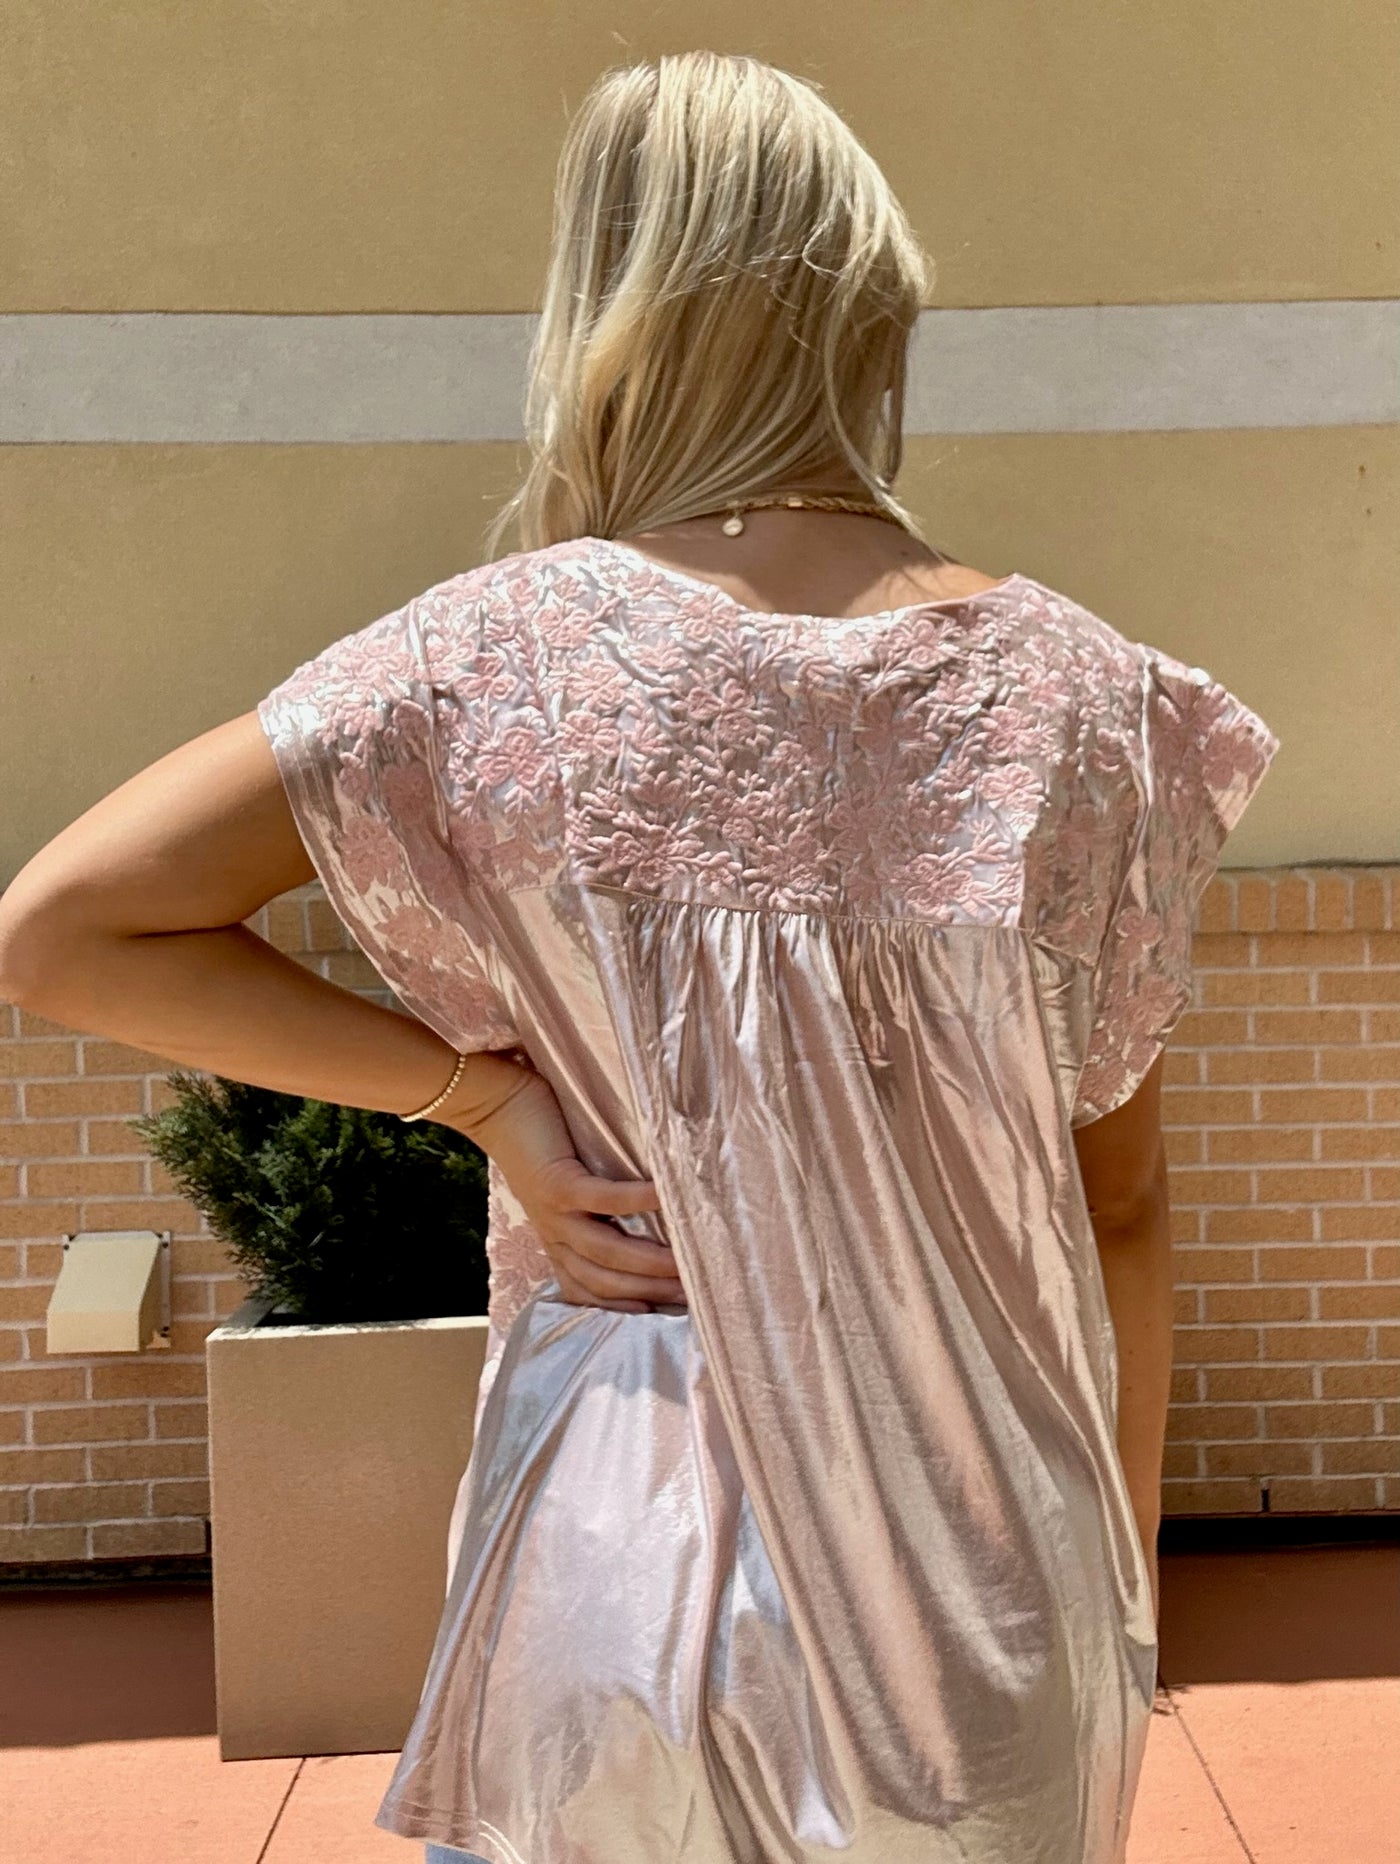 BACK VIEW OF AVA IN BLOUSE